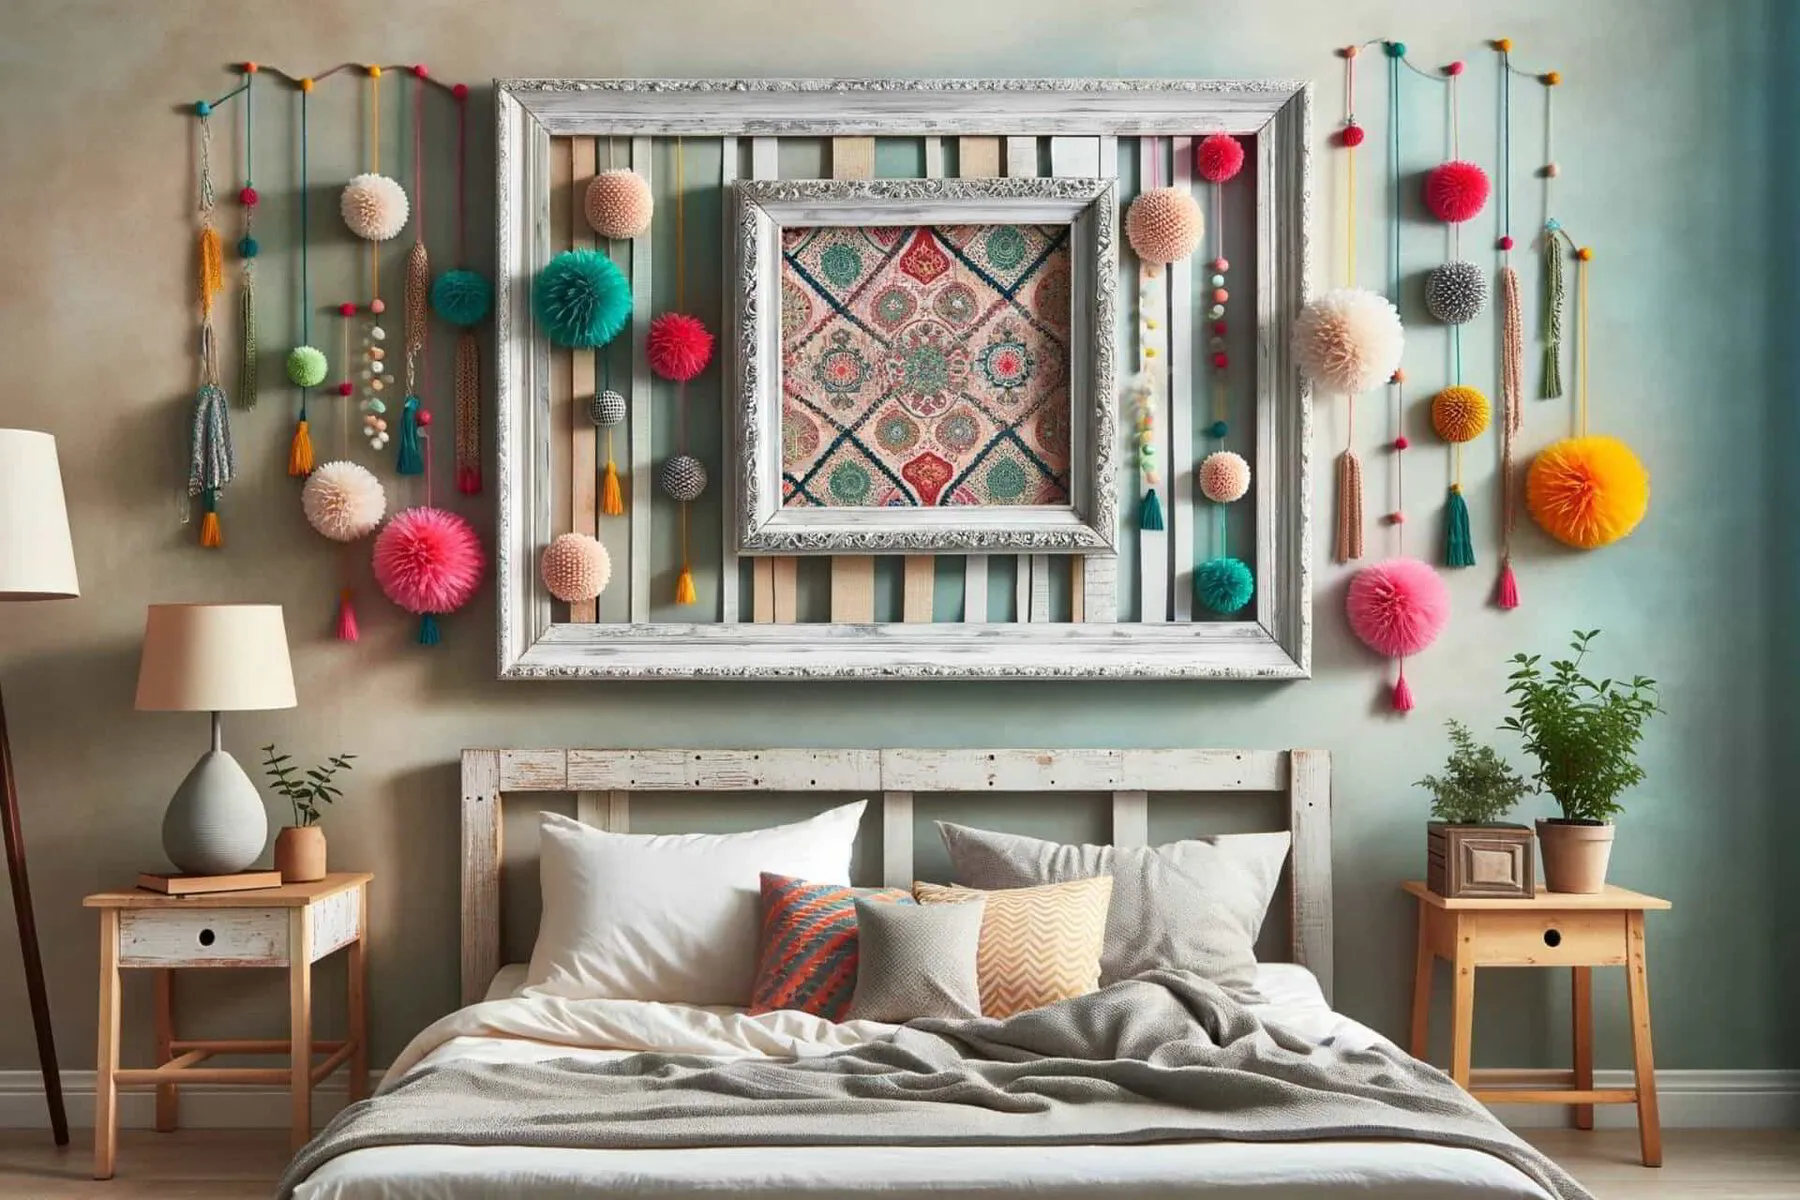 creative bedroom wall decor featuring repurposed everyday items transformed into unique art pieces